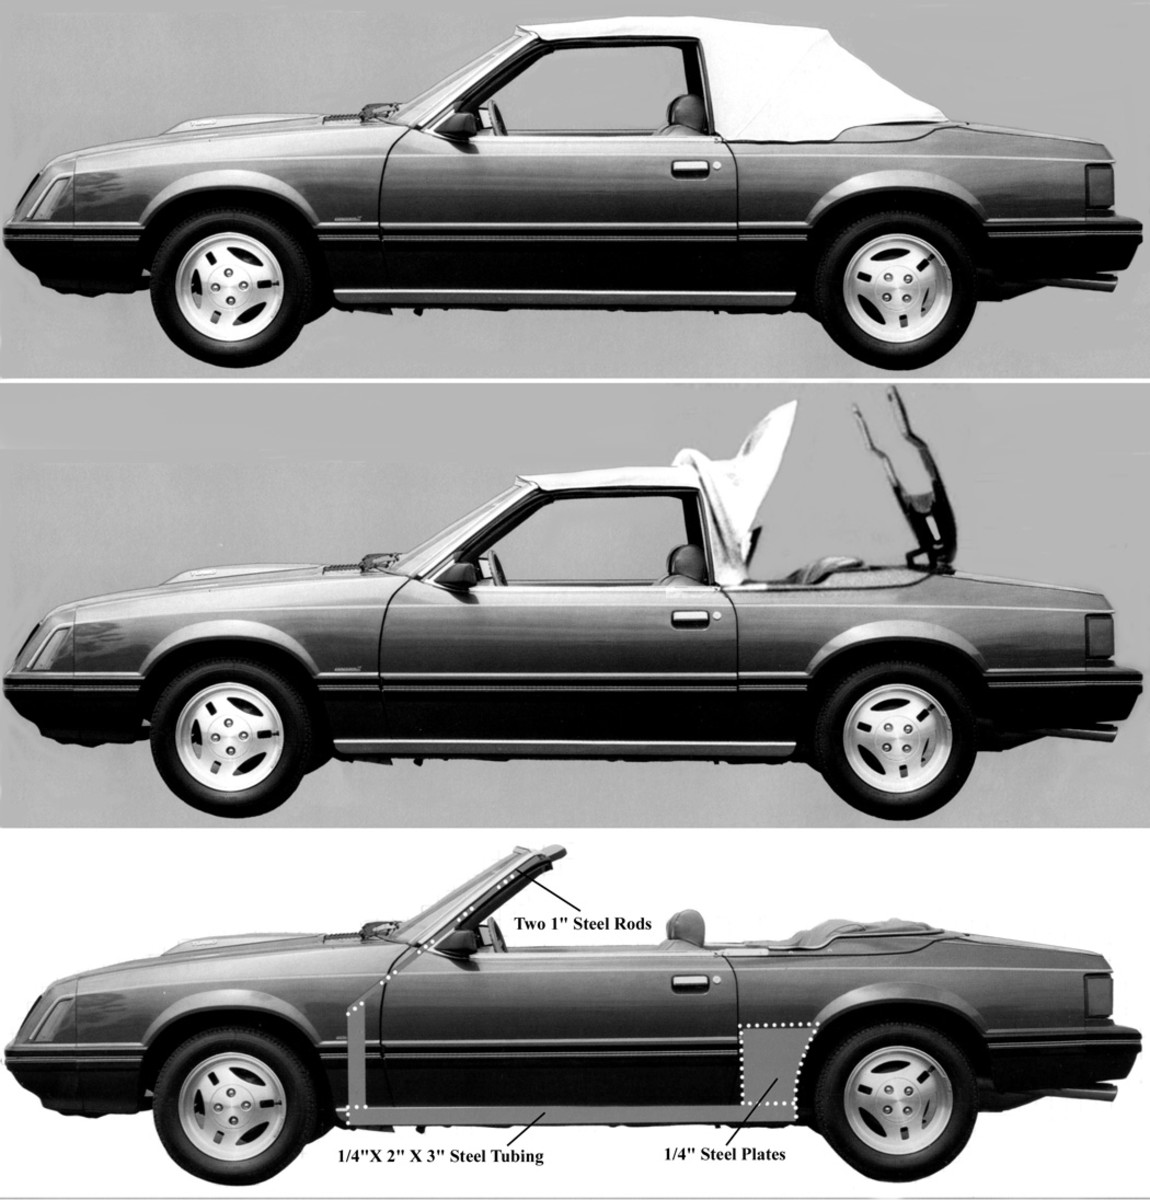 Shown are three stages to lowering the convertible top of a 1980-’82 Mustang CABRIO by Automobili Intermeccanica, and the hard hatch cover that hid the fabric roof. Pictured in the lower image are the subframe tubing and steel plate, plus steel rods inside the windshield frame, all of which added strength when converting a Mustang two-door coupe into a convertible.